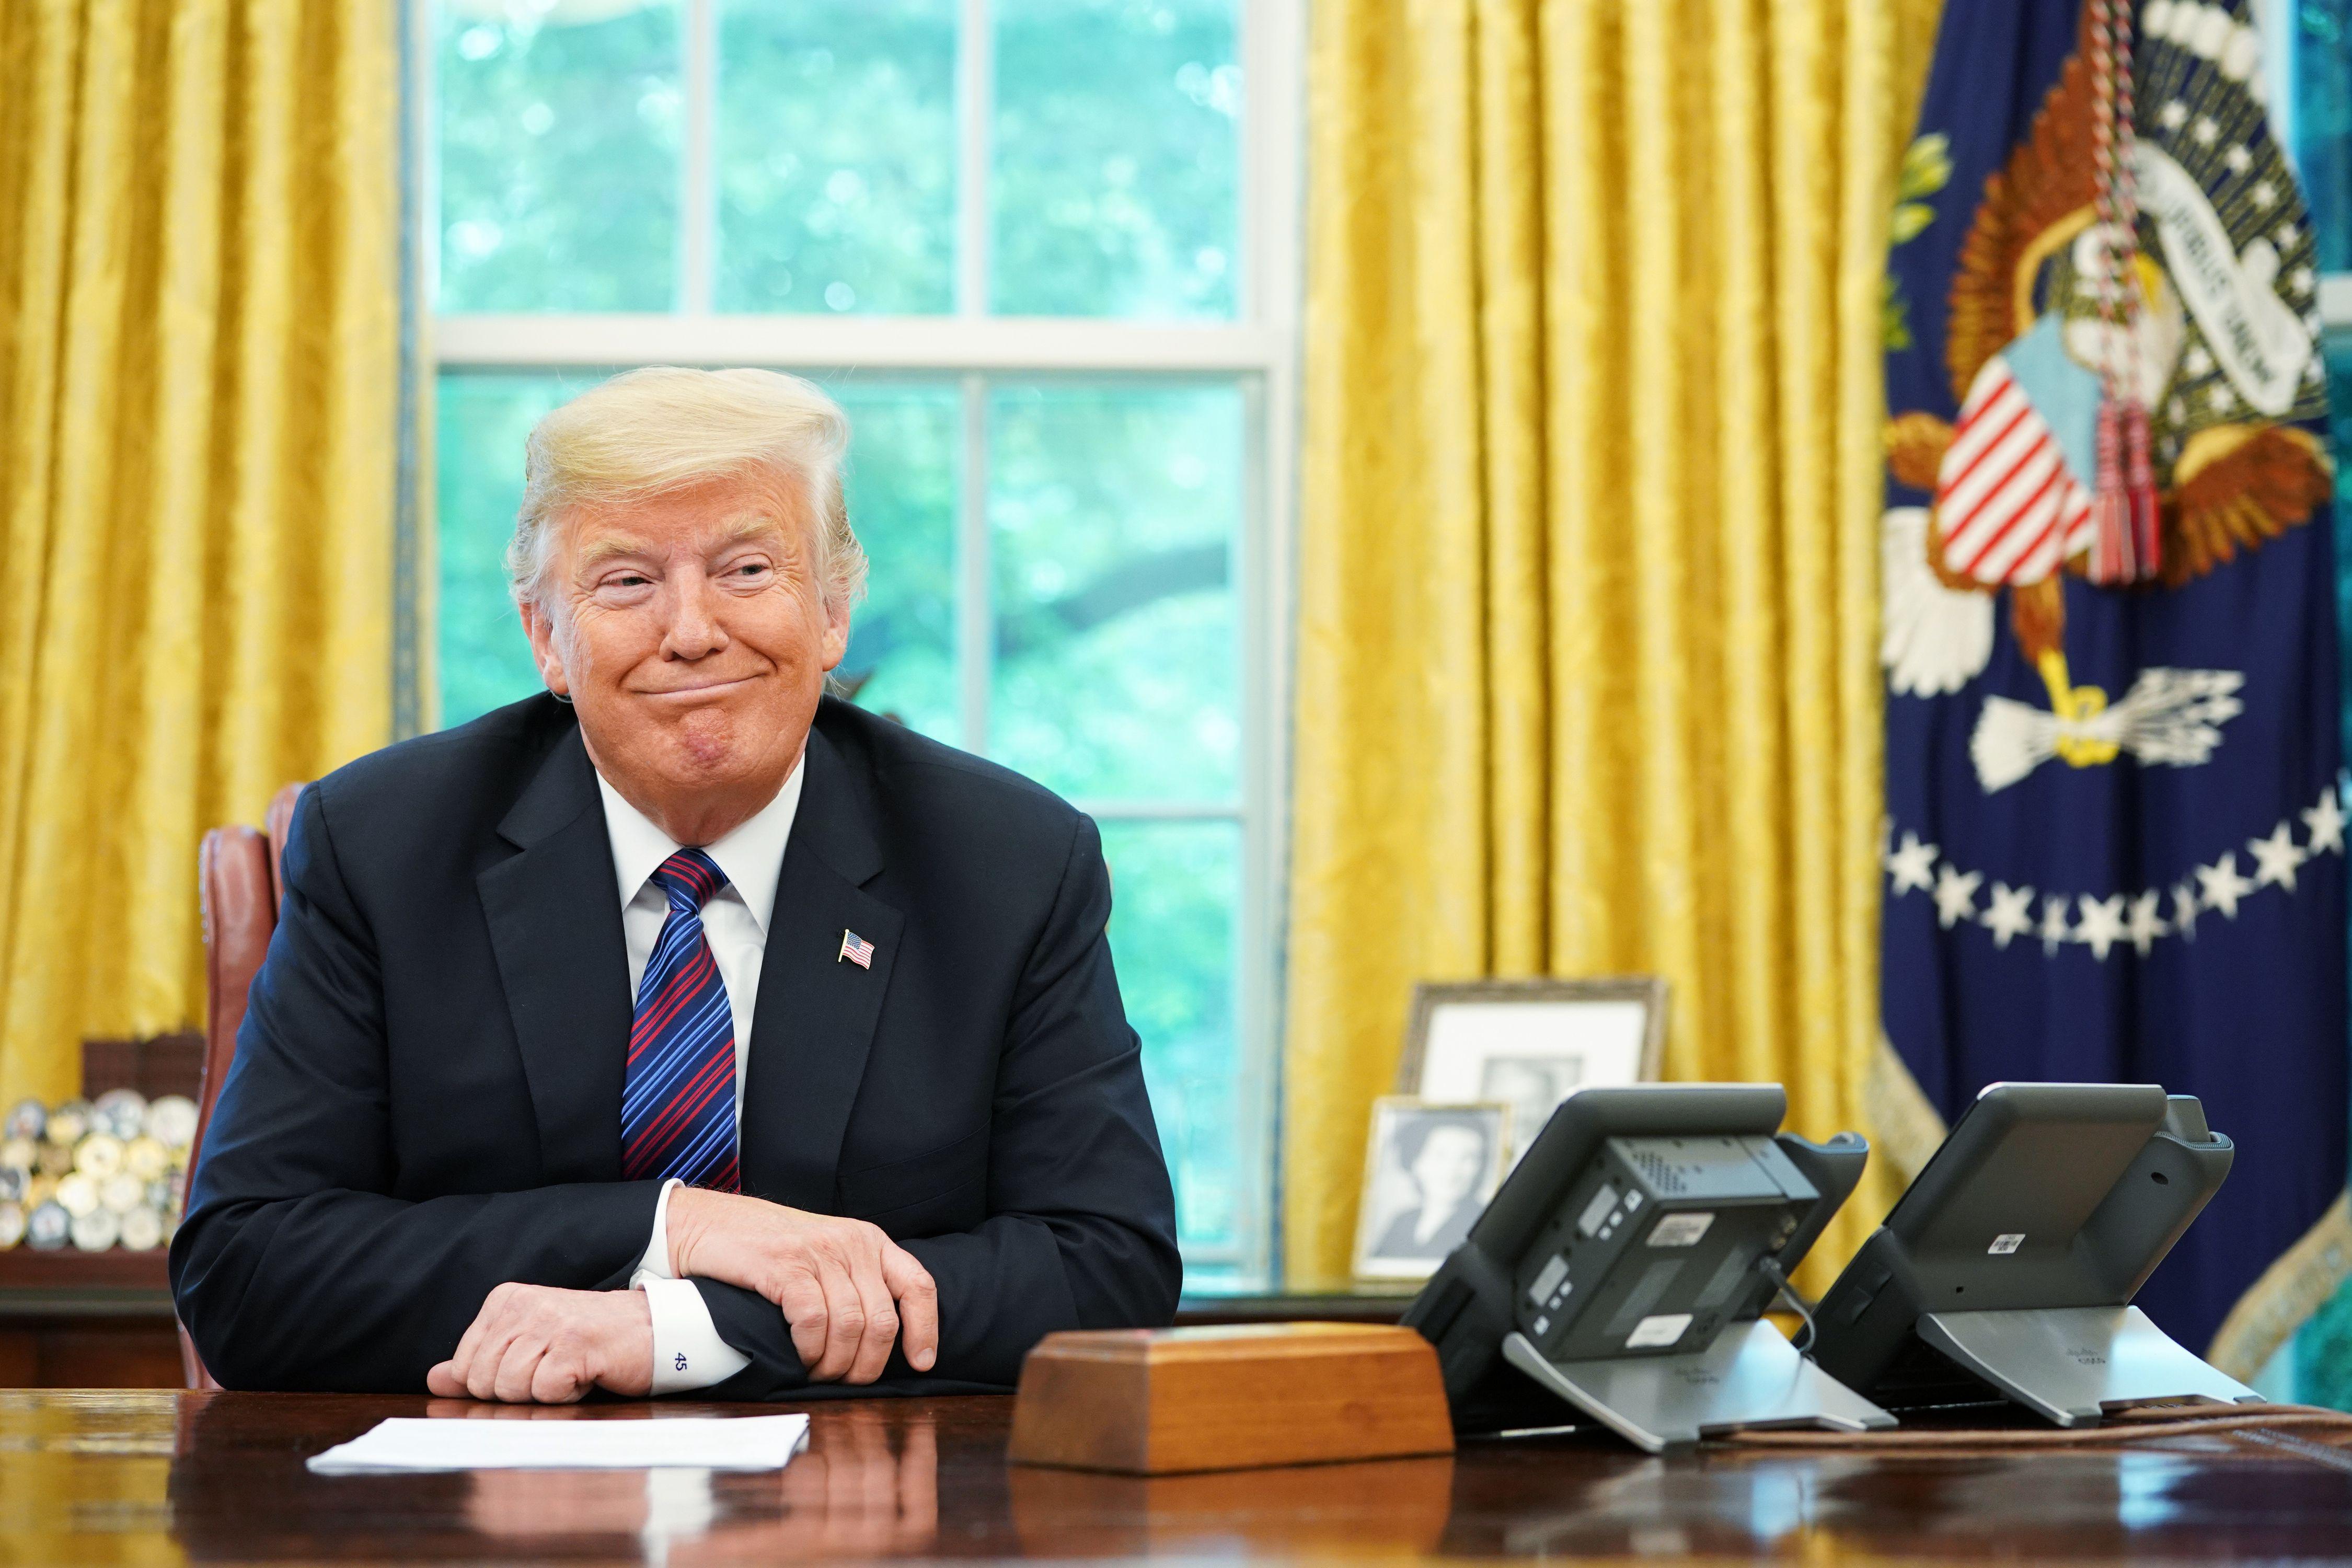 TOPSHOT - US President Donald Trump listens during a phone conversation with Mexico's President Enrique Pena Nieto on trade in the Oval Office of the White House in Washington, DC on August 27, 2018. - President Donald Trump said Monday the US had reached a 'really good deal' with Mexico and talks with Canada would begin shortly on a new regional free trade pact.'It's a big day for trade. It's a really good deal for both countries,' Trump said.'Canada, we will start negotiations shortly. I'll be calling their prime minister very soon,' Trump said.US and Mexican negotiators have been working for weeks to iron out differences in order to revise the nearly 25-year old North American Free Trade Agreement, while Canada was waiting to rejoin the negotiations. (Photo by MANDEL NGAN / AFP)        (Photo credit should read MANDEL NGAN/AFP/Getty Images)